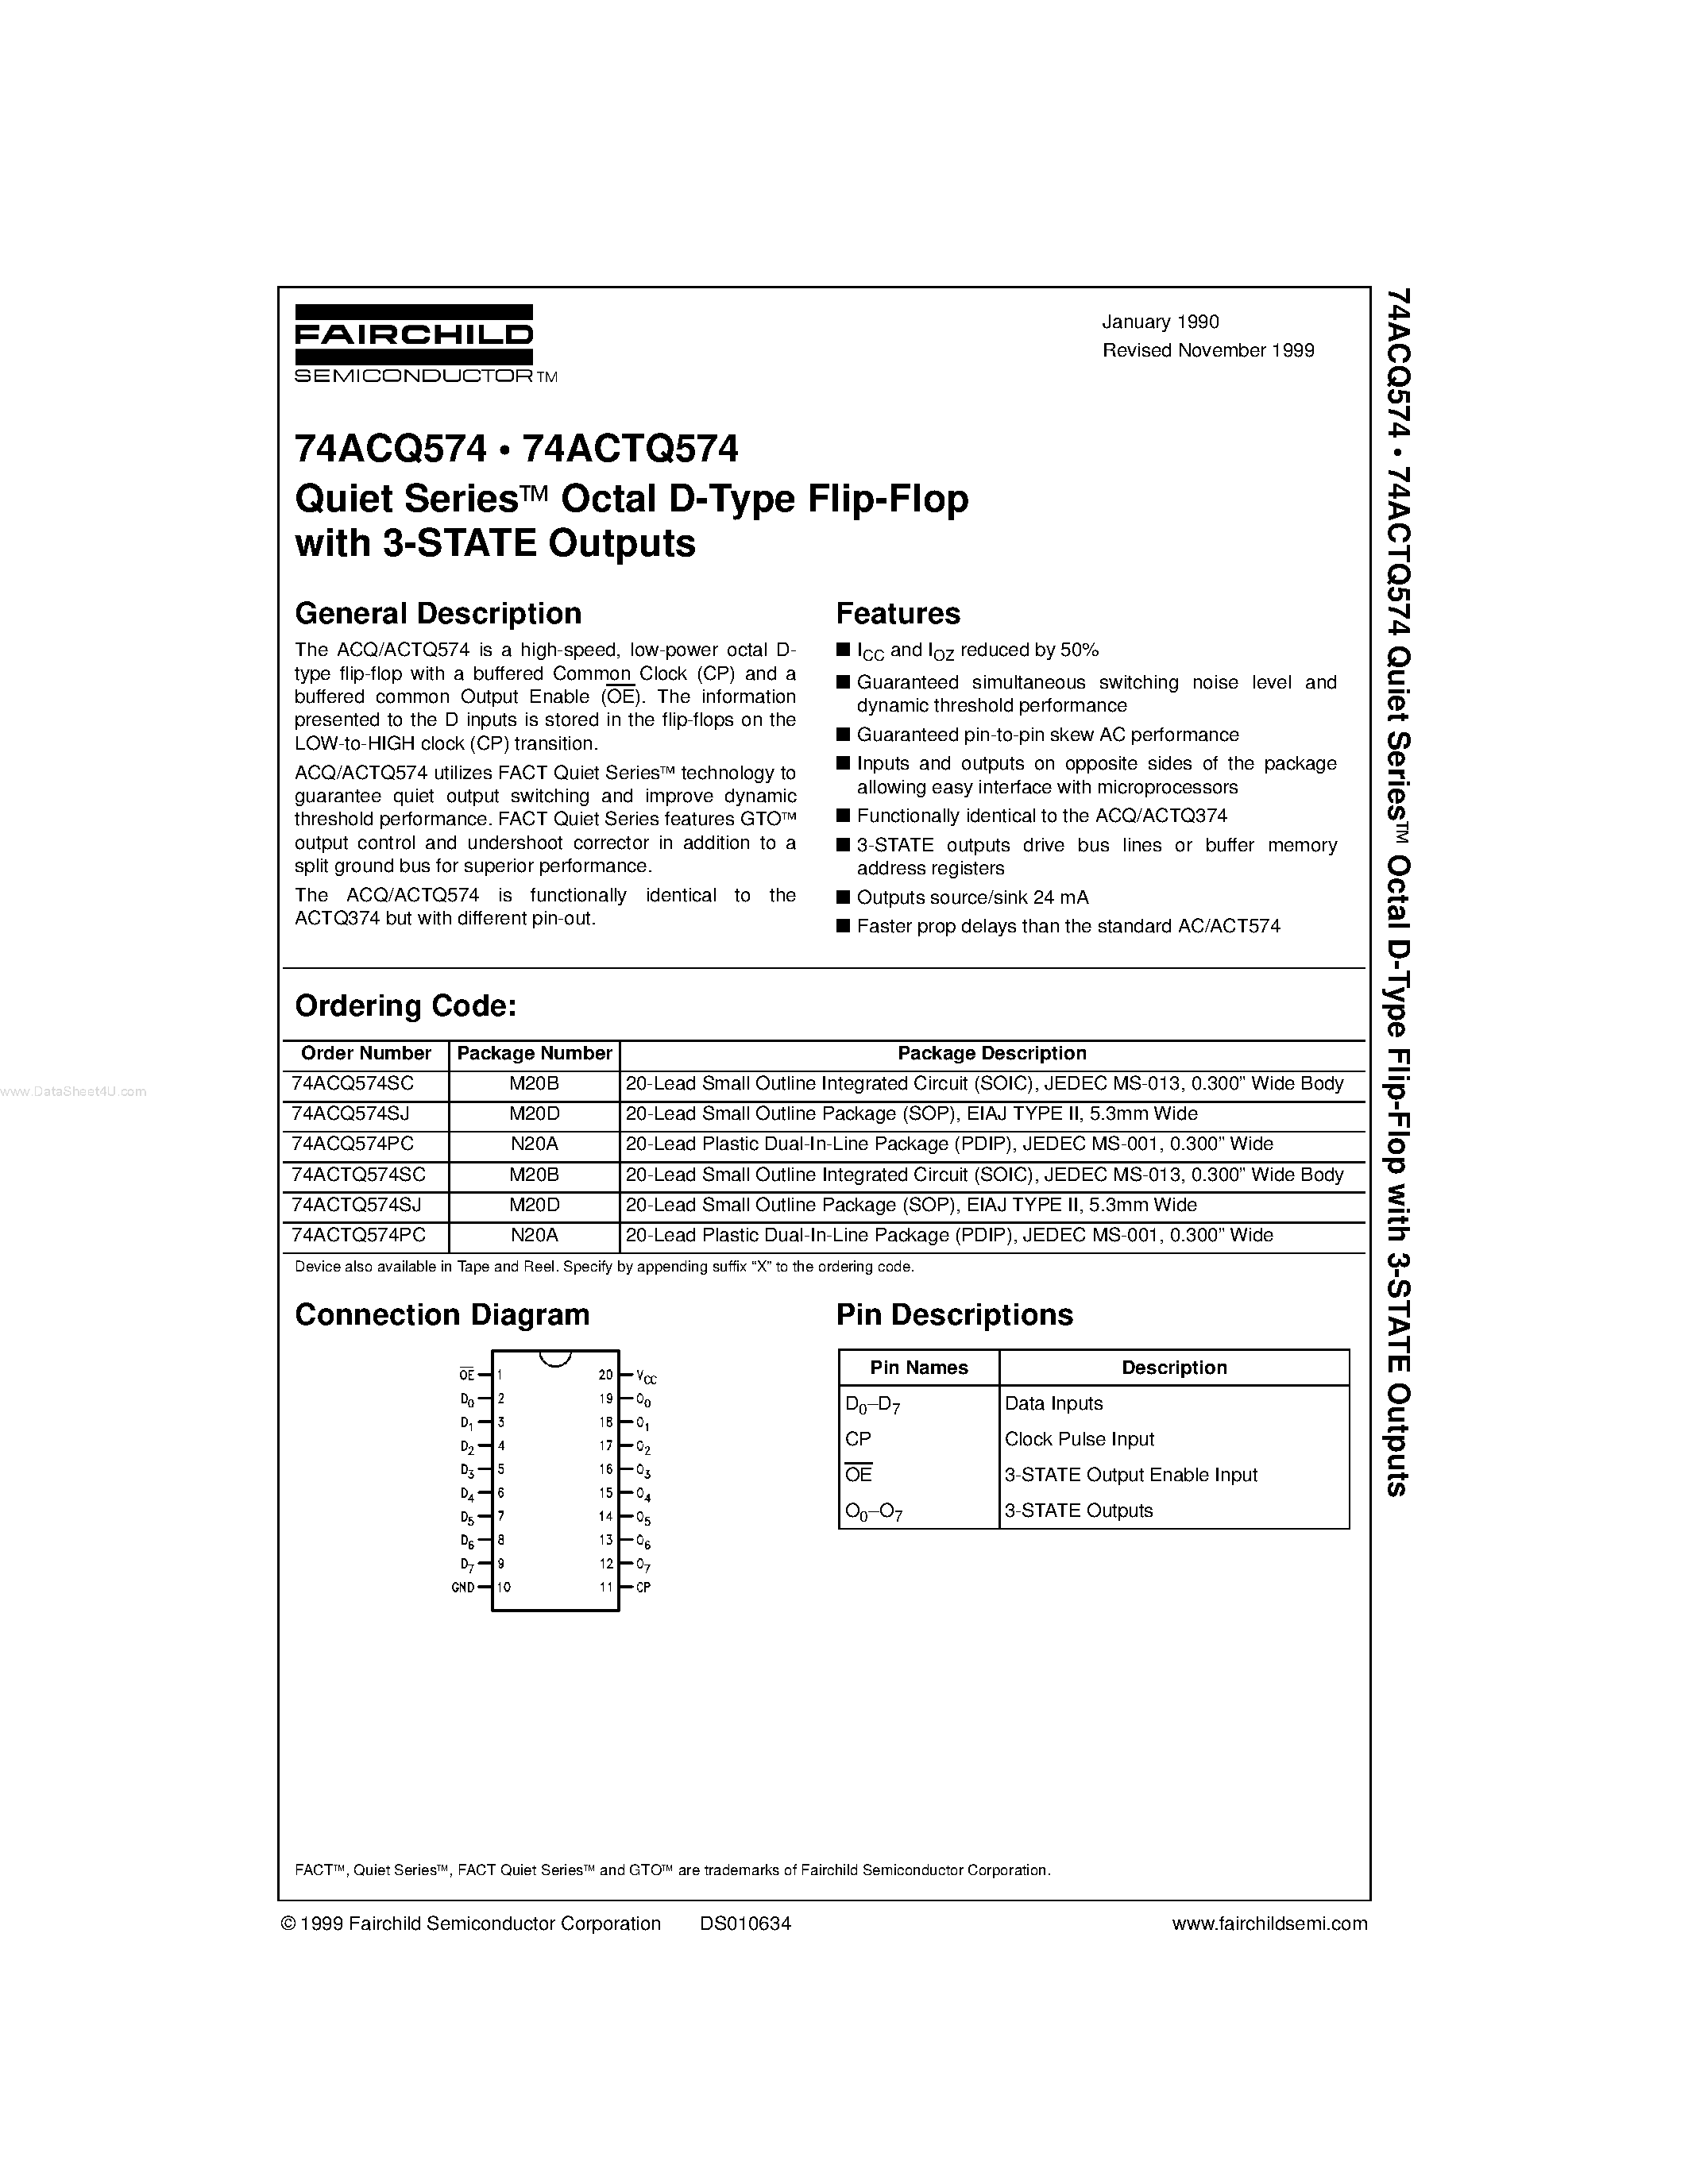 Datasheet 74ACQ574 - Quiet Series Octal D-Type Flip-Flop with 3-STATE Outputs page 1